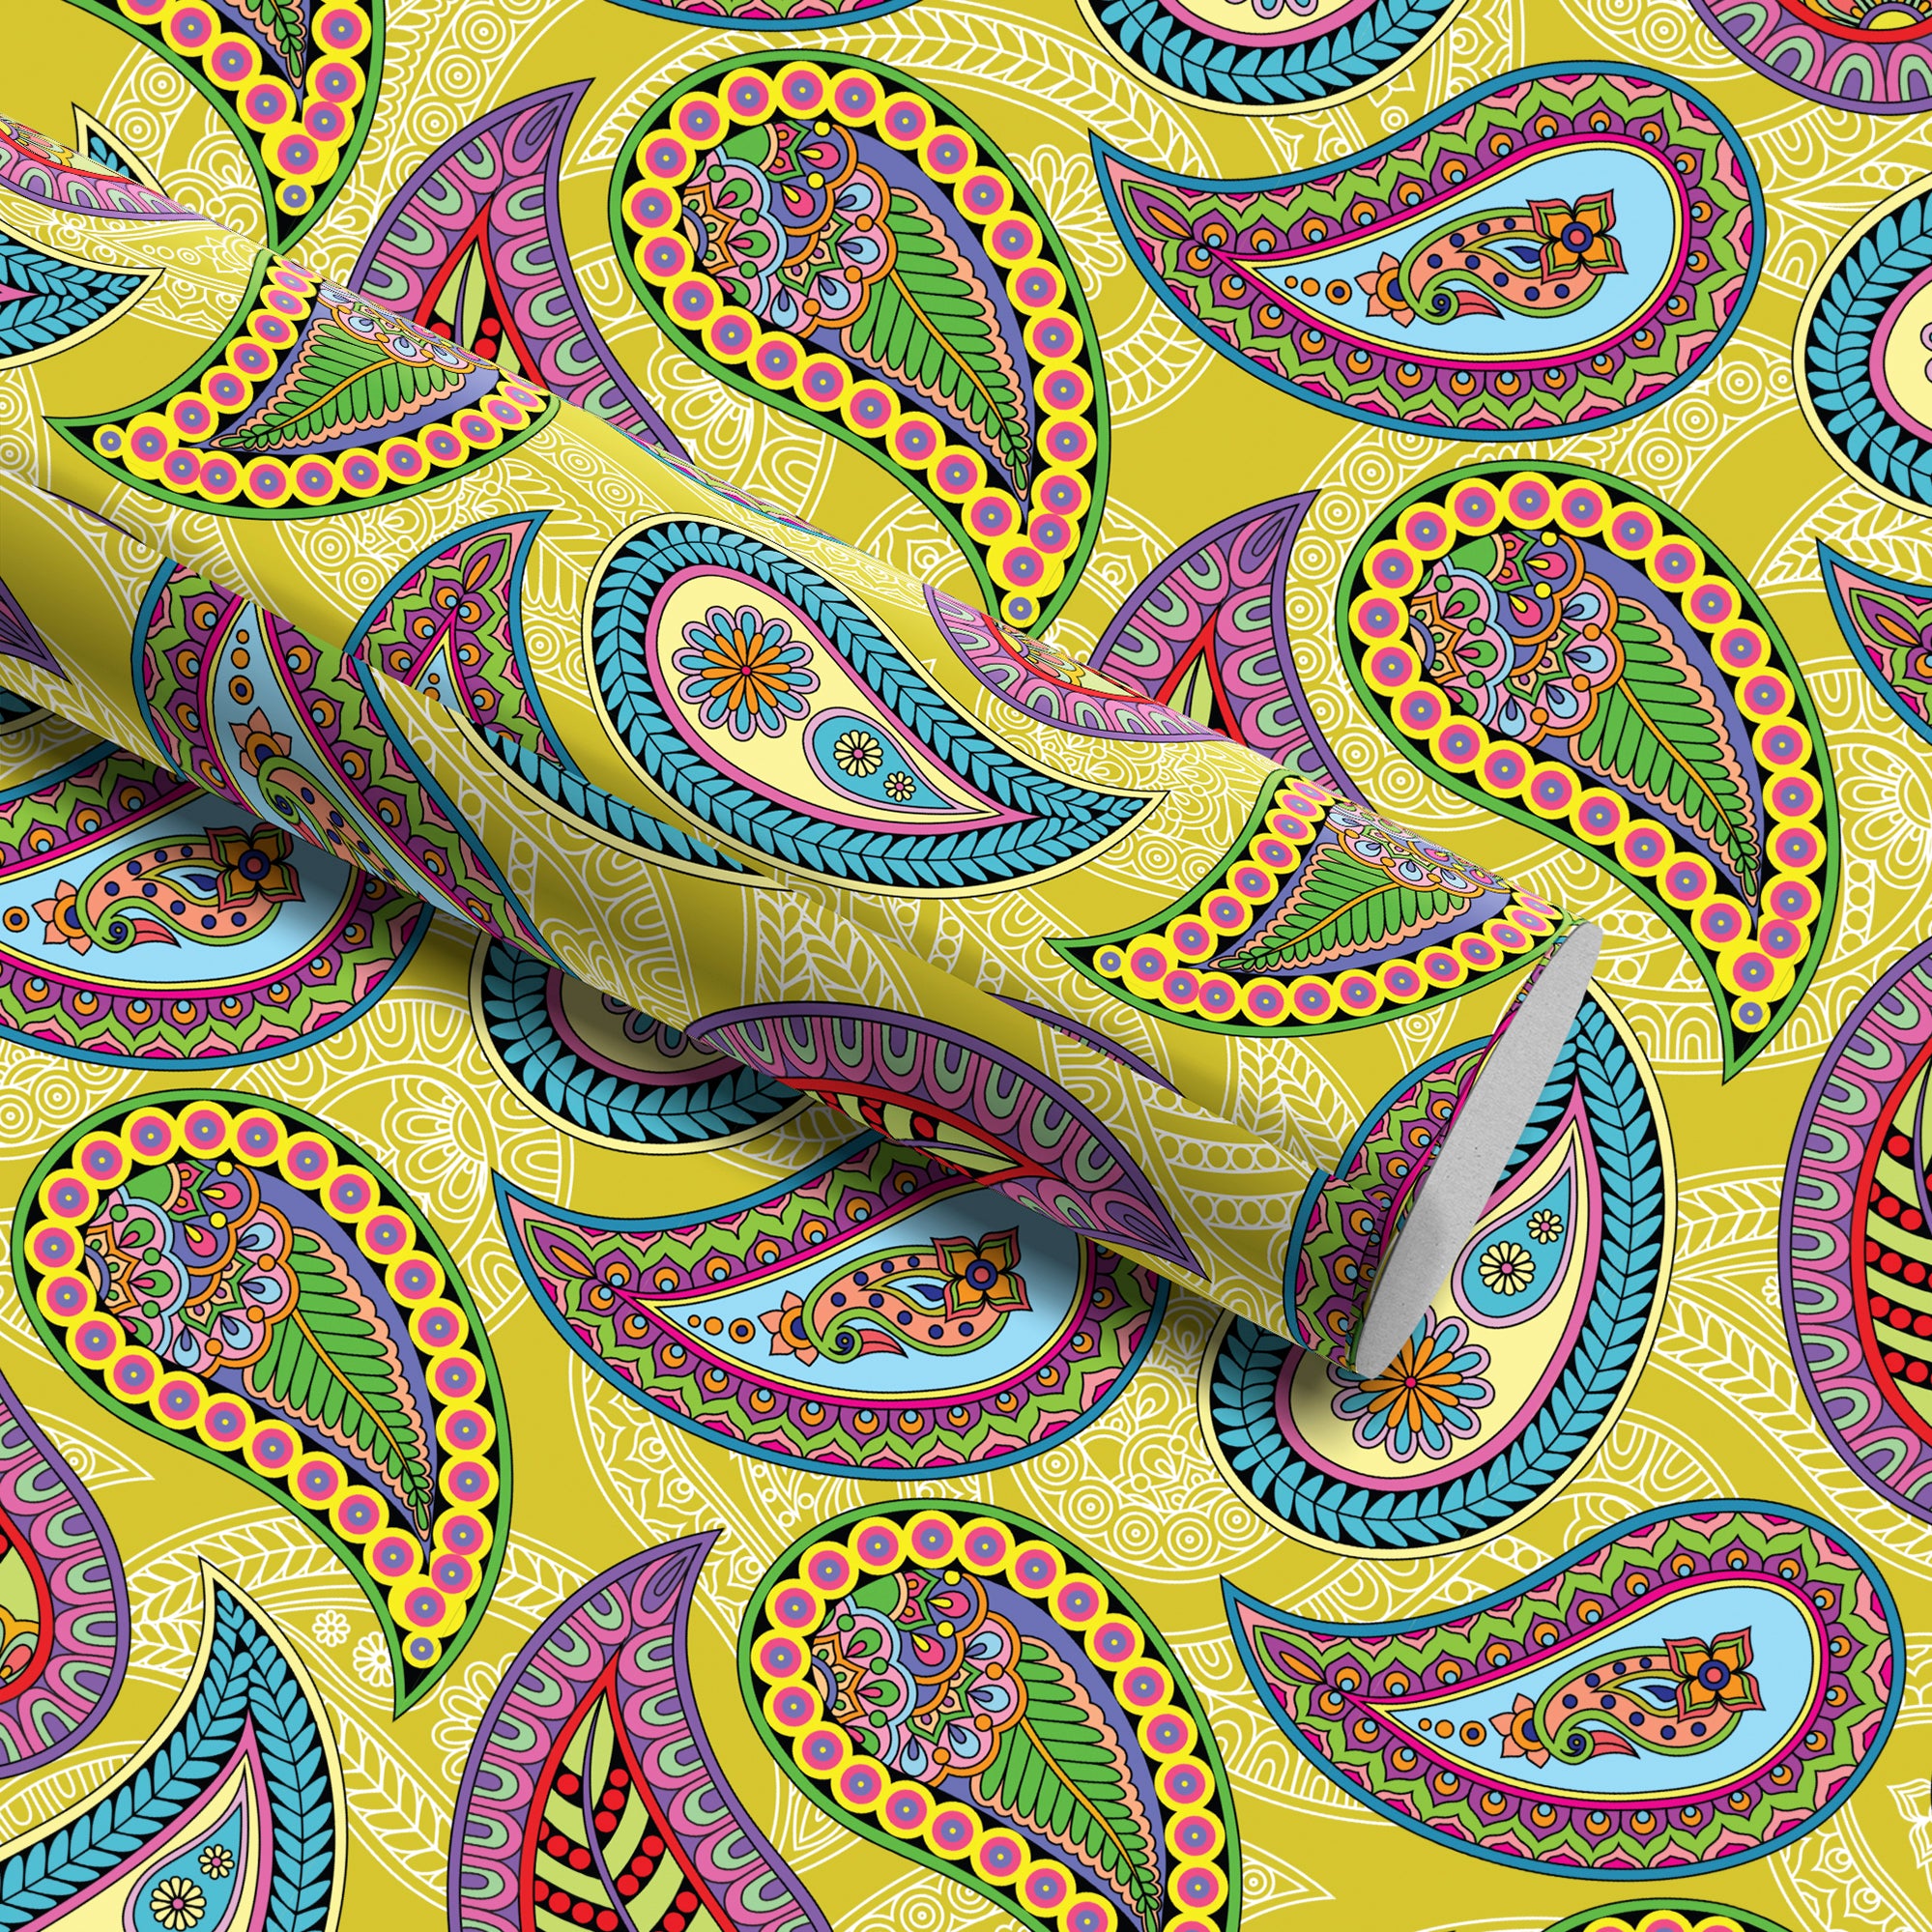 Sunshine Paisley Wrapping Paper